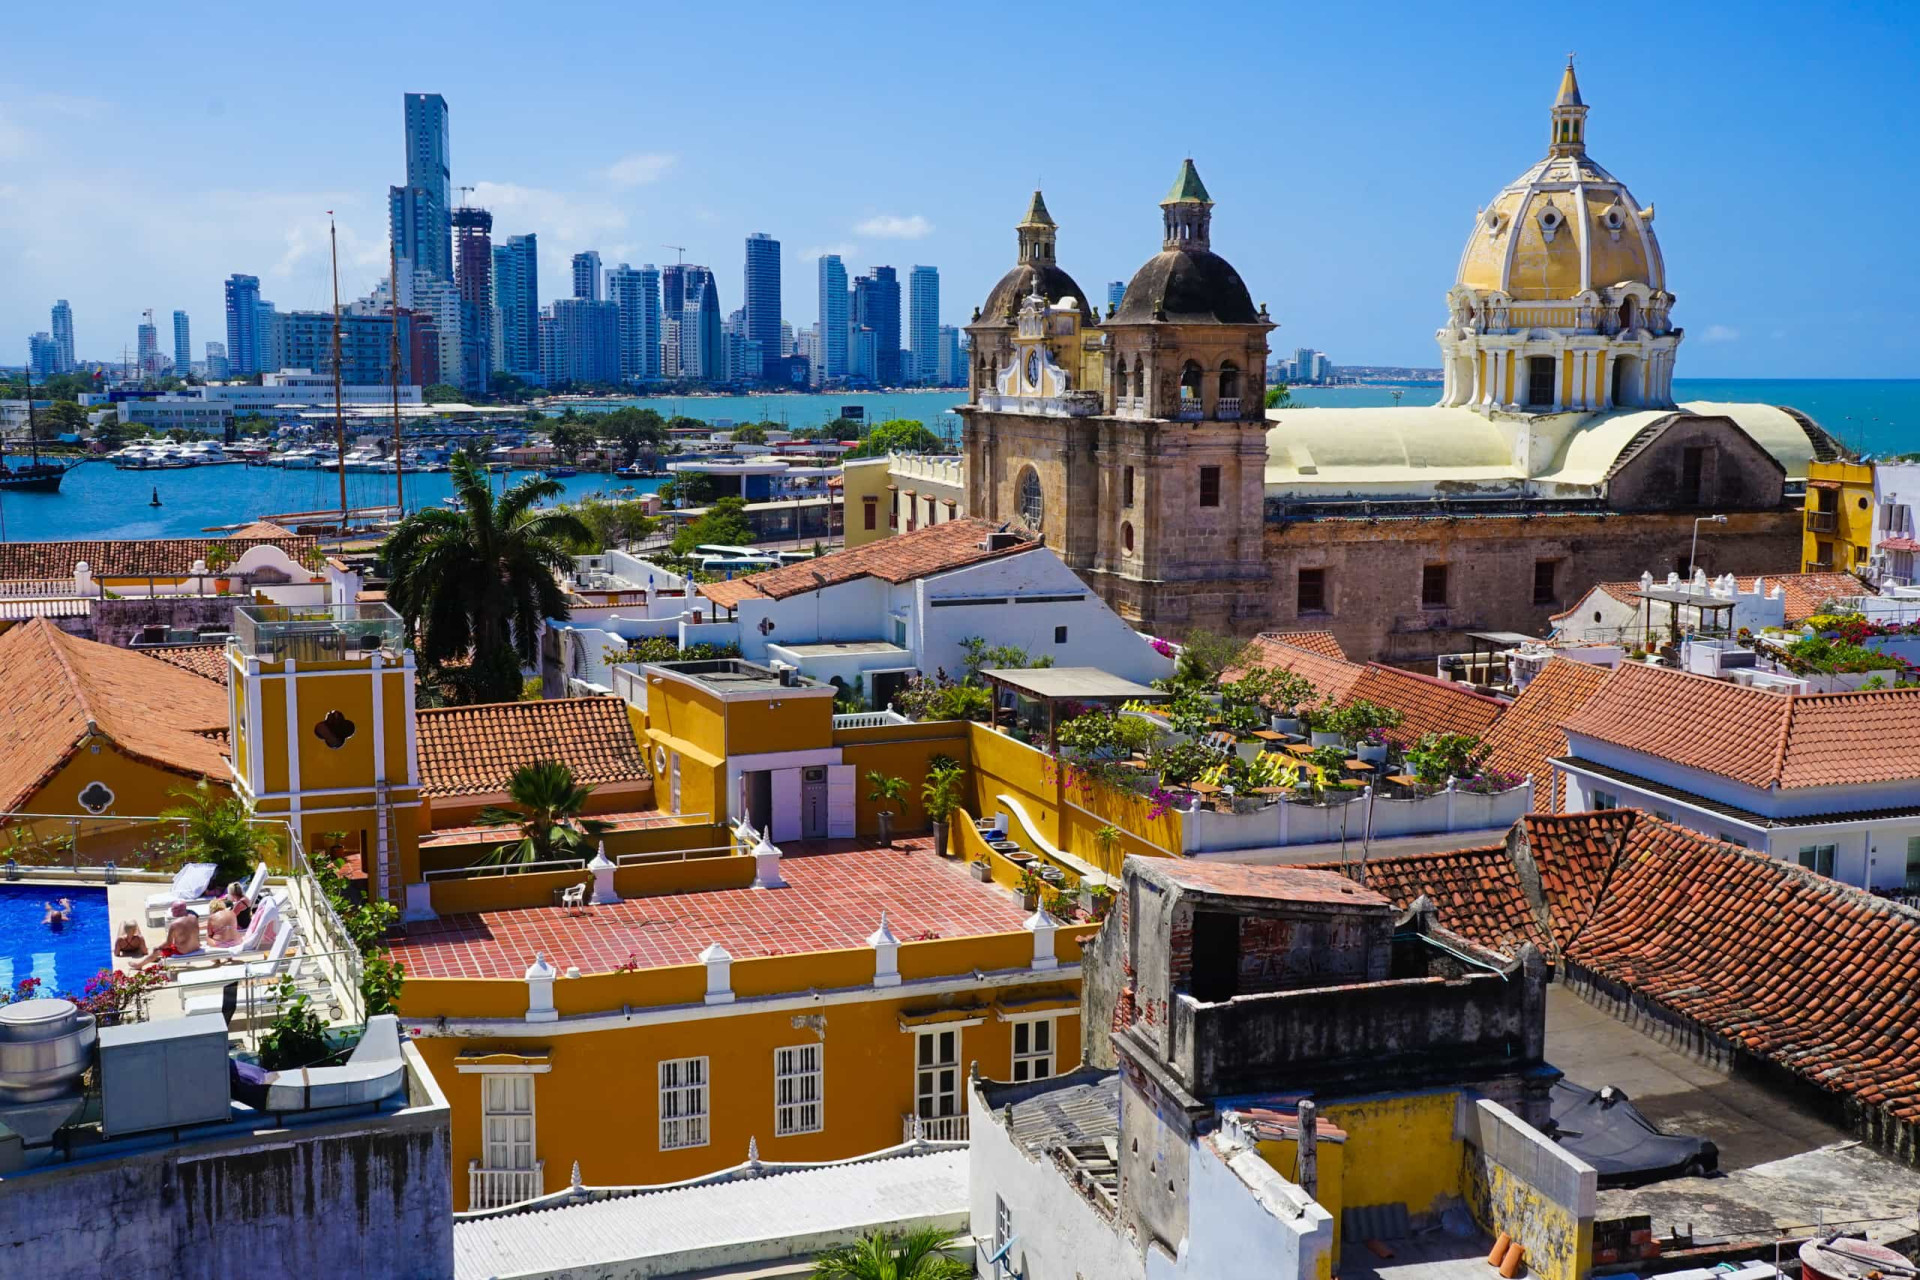 Location: Cartagena<br>Criteria: Cultural<br>Year established: 1984<br>Description: The city’s fortress and defensive walls, constructed at the beginning of 1586, surround a historic center that mesmerizes with its ensemble of churches, convents, and a host of other colonial architecture featuring Andalusian design signatures.<p>You may also like:<a href="https://www.starsinsider.com/n/204926?utm_source=msn.com&utm_medium=display&utm_campaign=referral_description&utm_content=413555v12en-us"> Famous Americans who married foreigners</a></p>